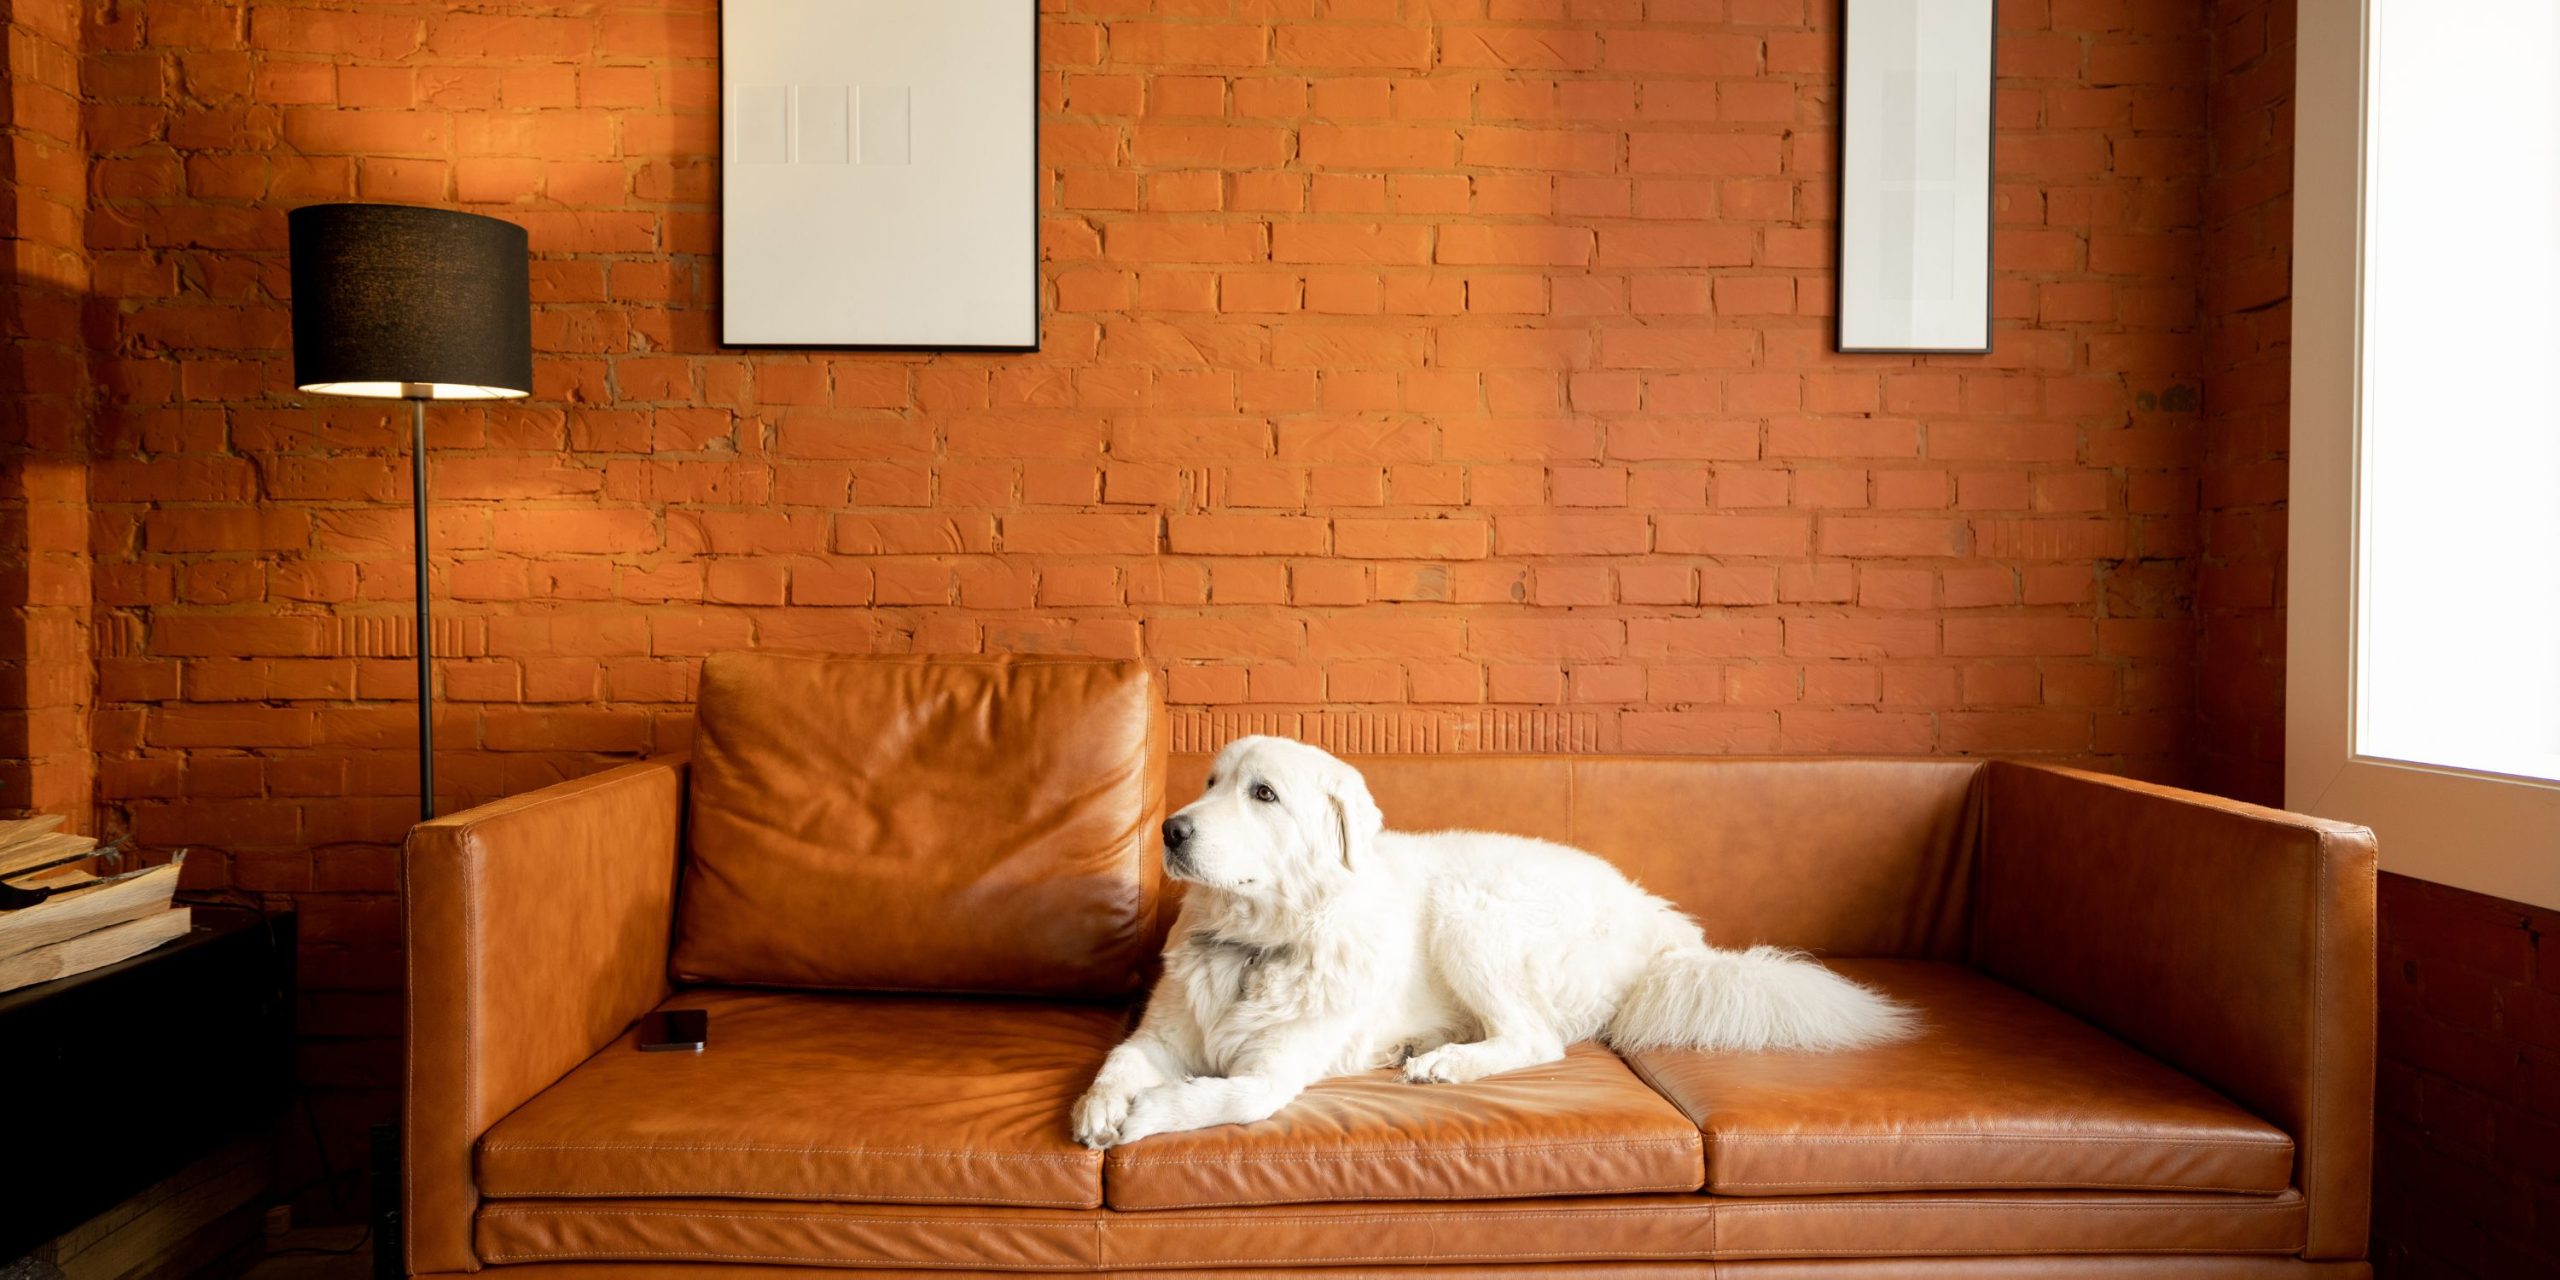 How To Take Care Of A Big Dog In An Apartment – 10 Great Tips!